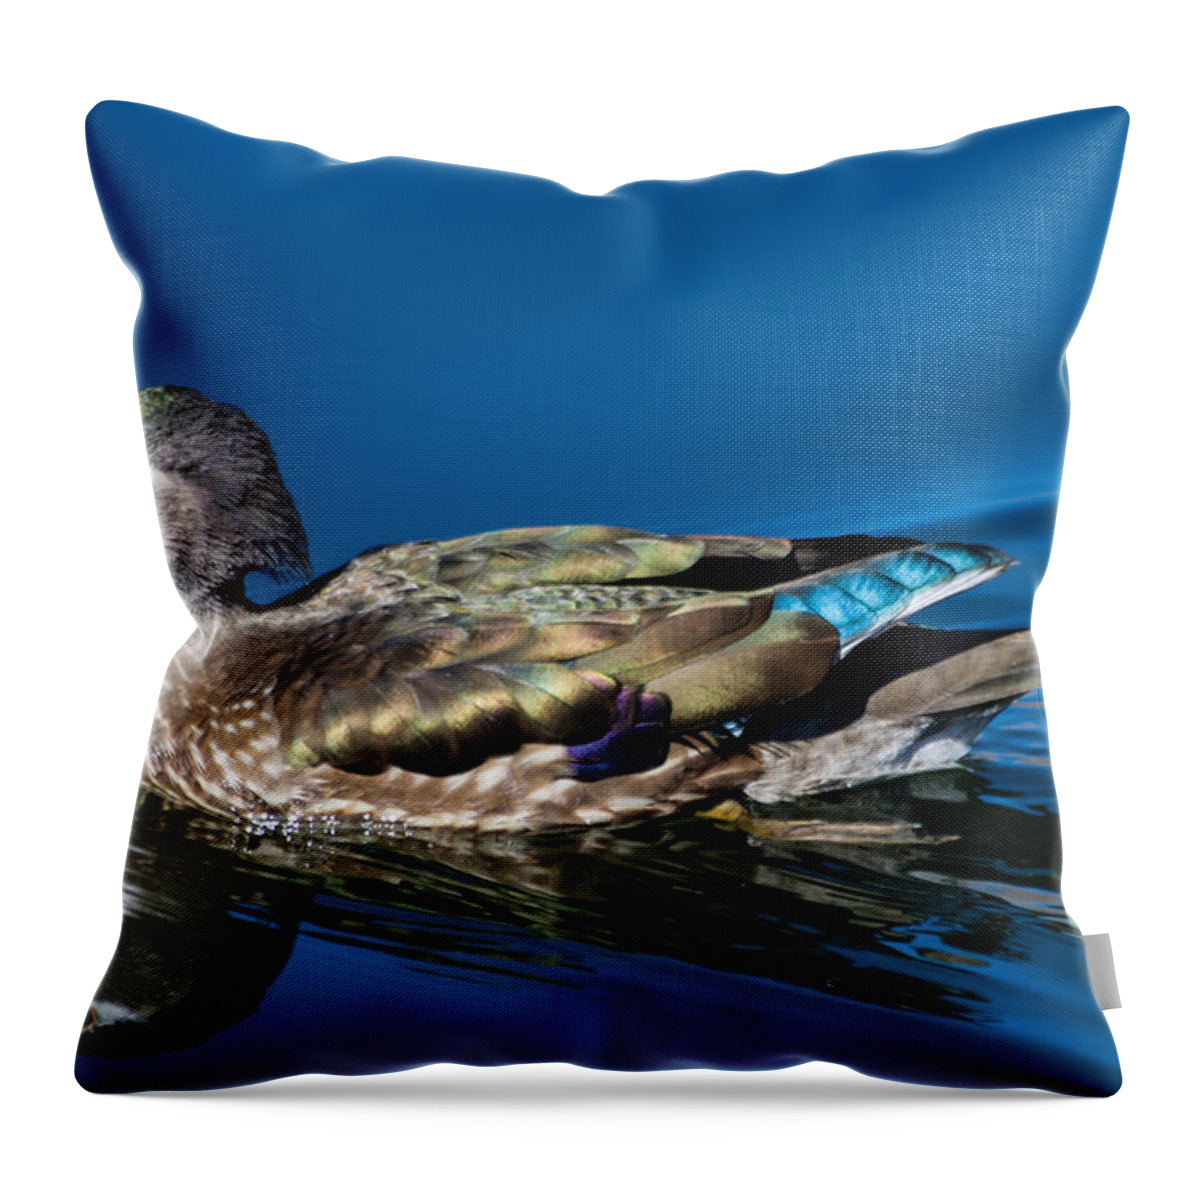 Wood Duck Throw Pillow featuring the photograph Female Wood Duck by Mindy Musick King